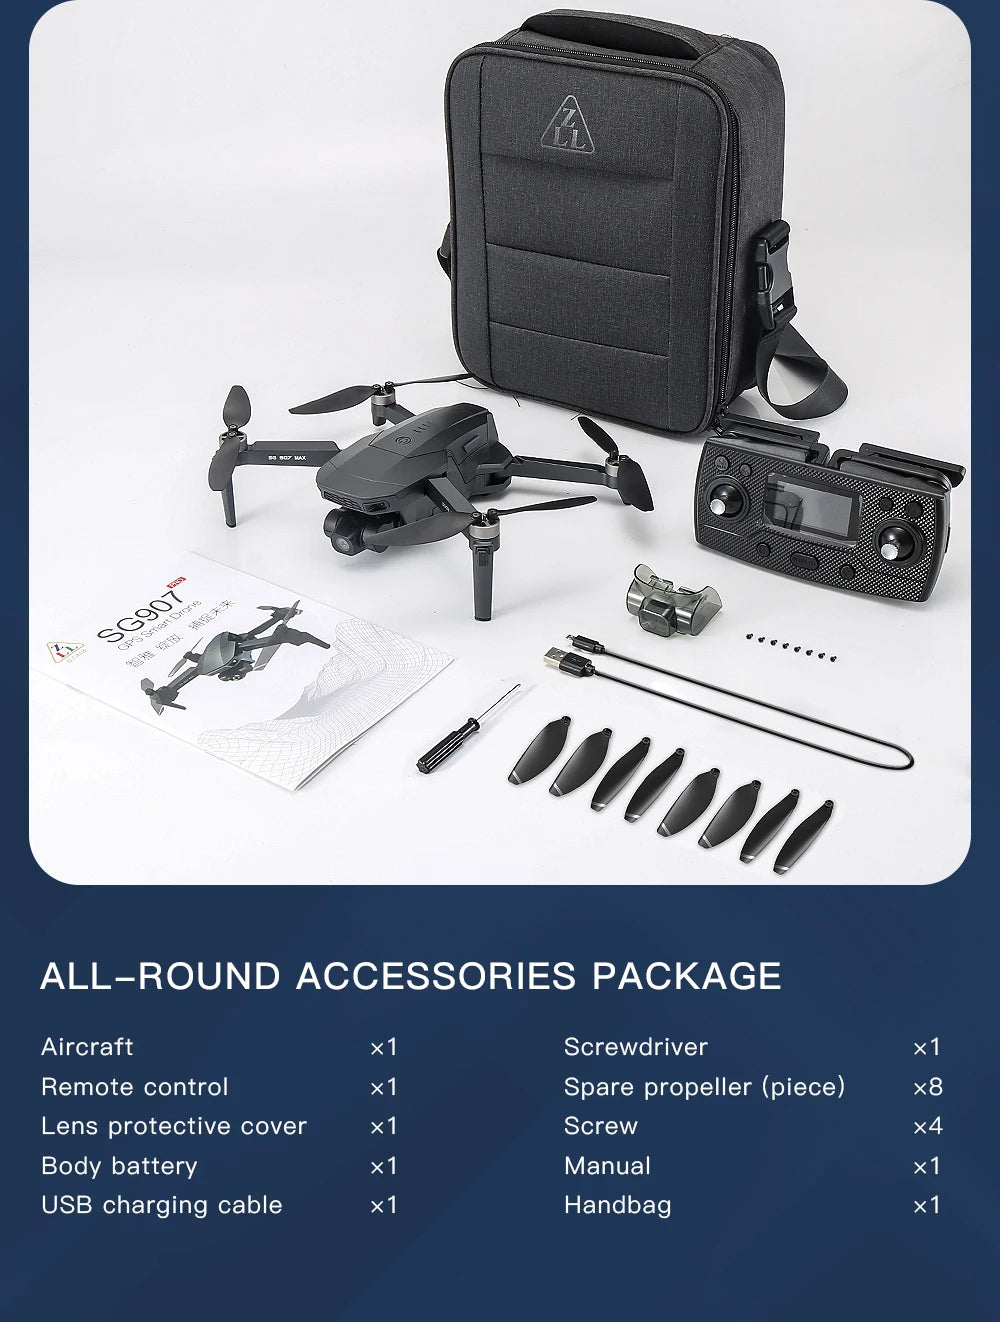 SG907 MAX GPS Drone, ALL-ROUND ACCESSORIES PACKAGE Aircraft X1 Screwdrive